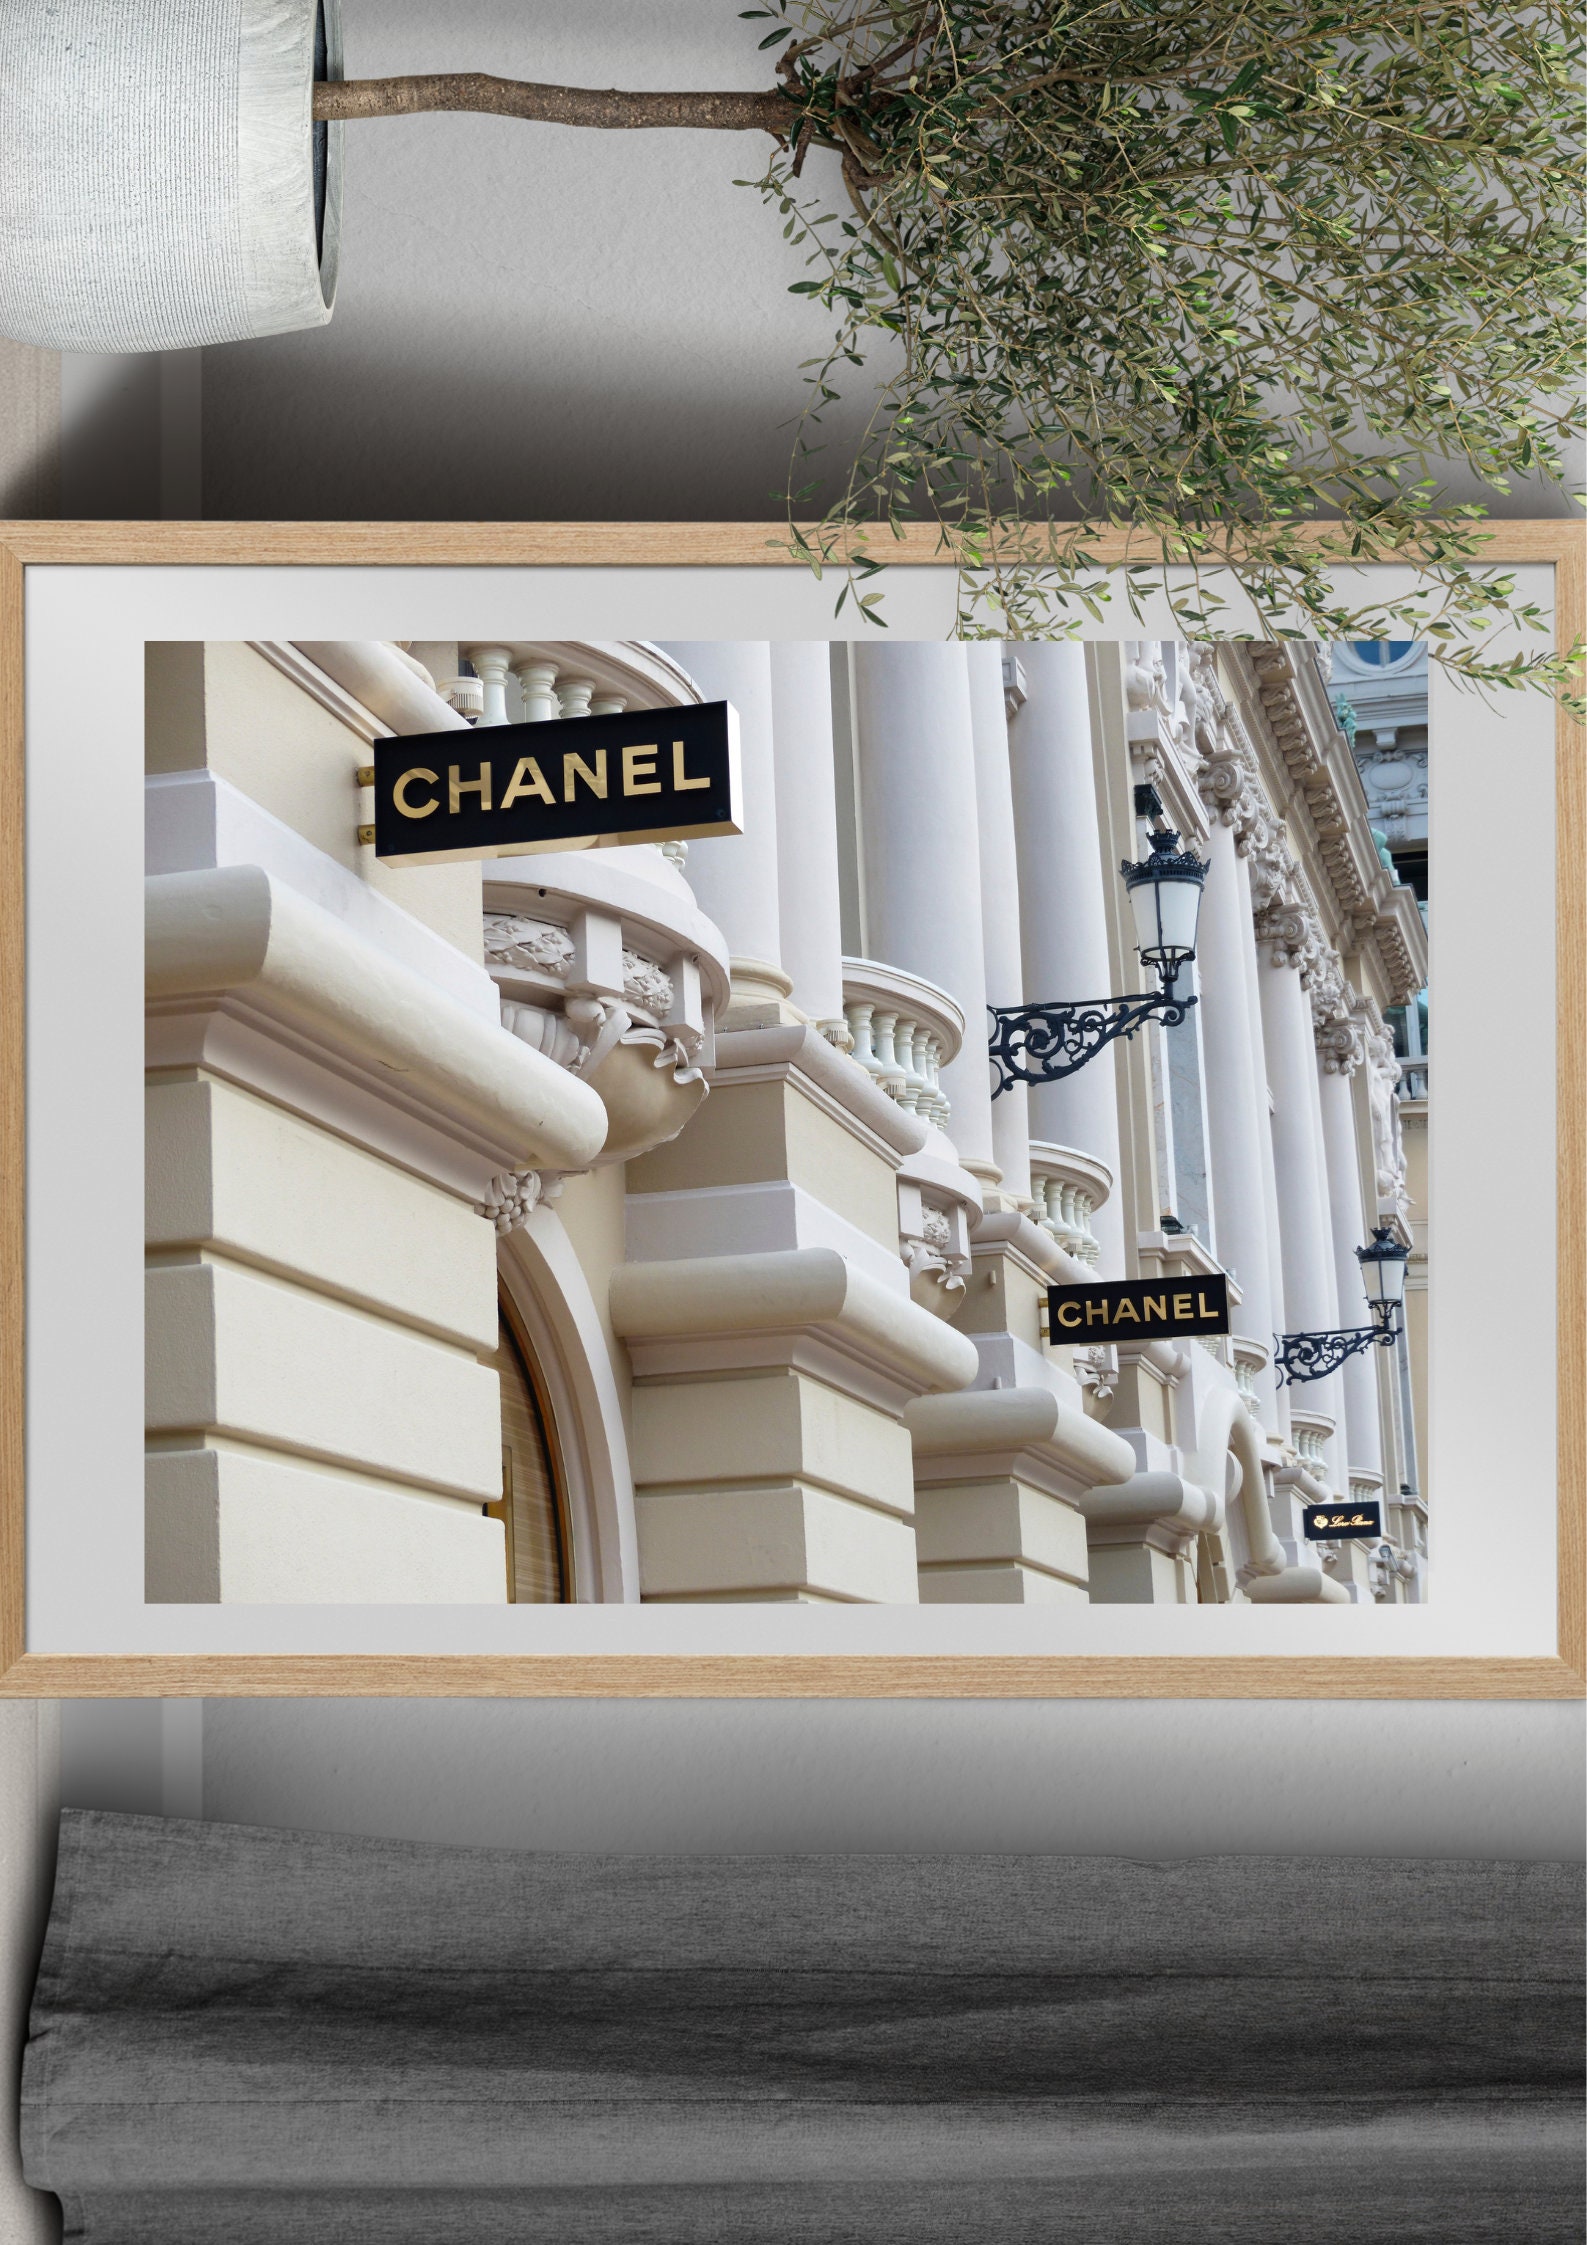 Chanel Shop Poster 